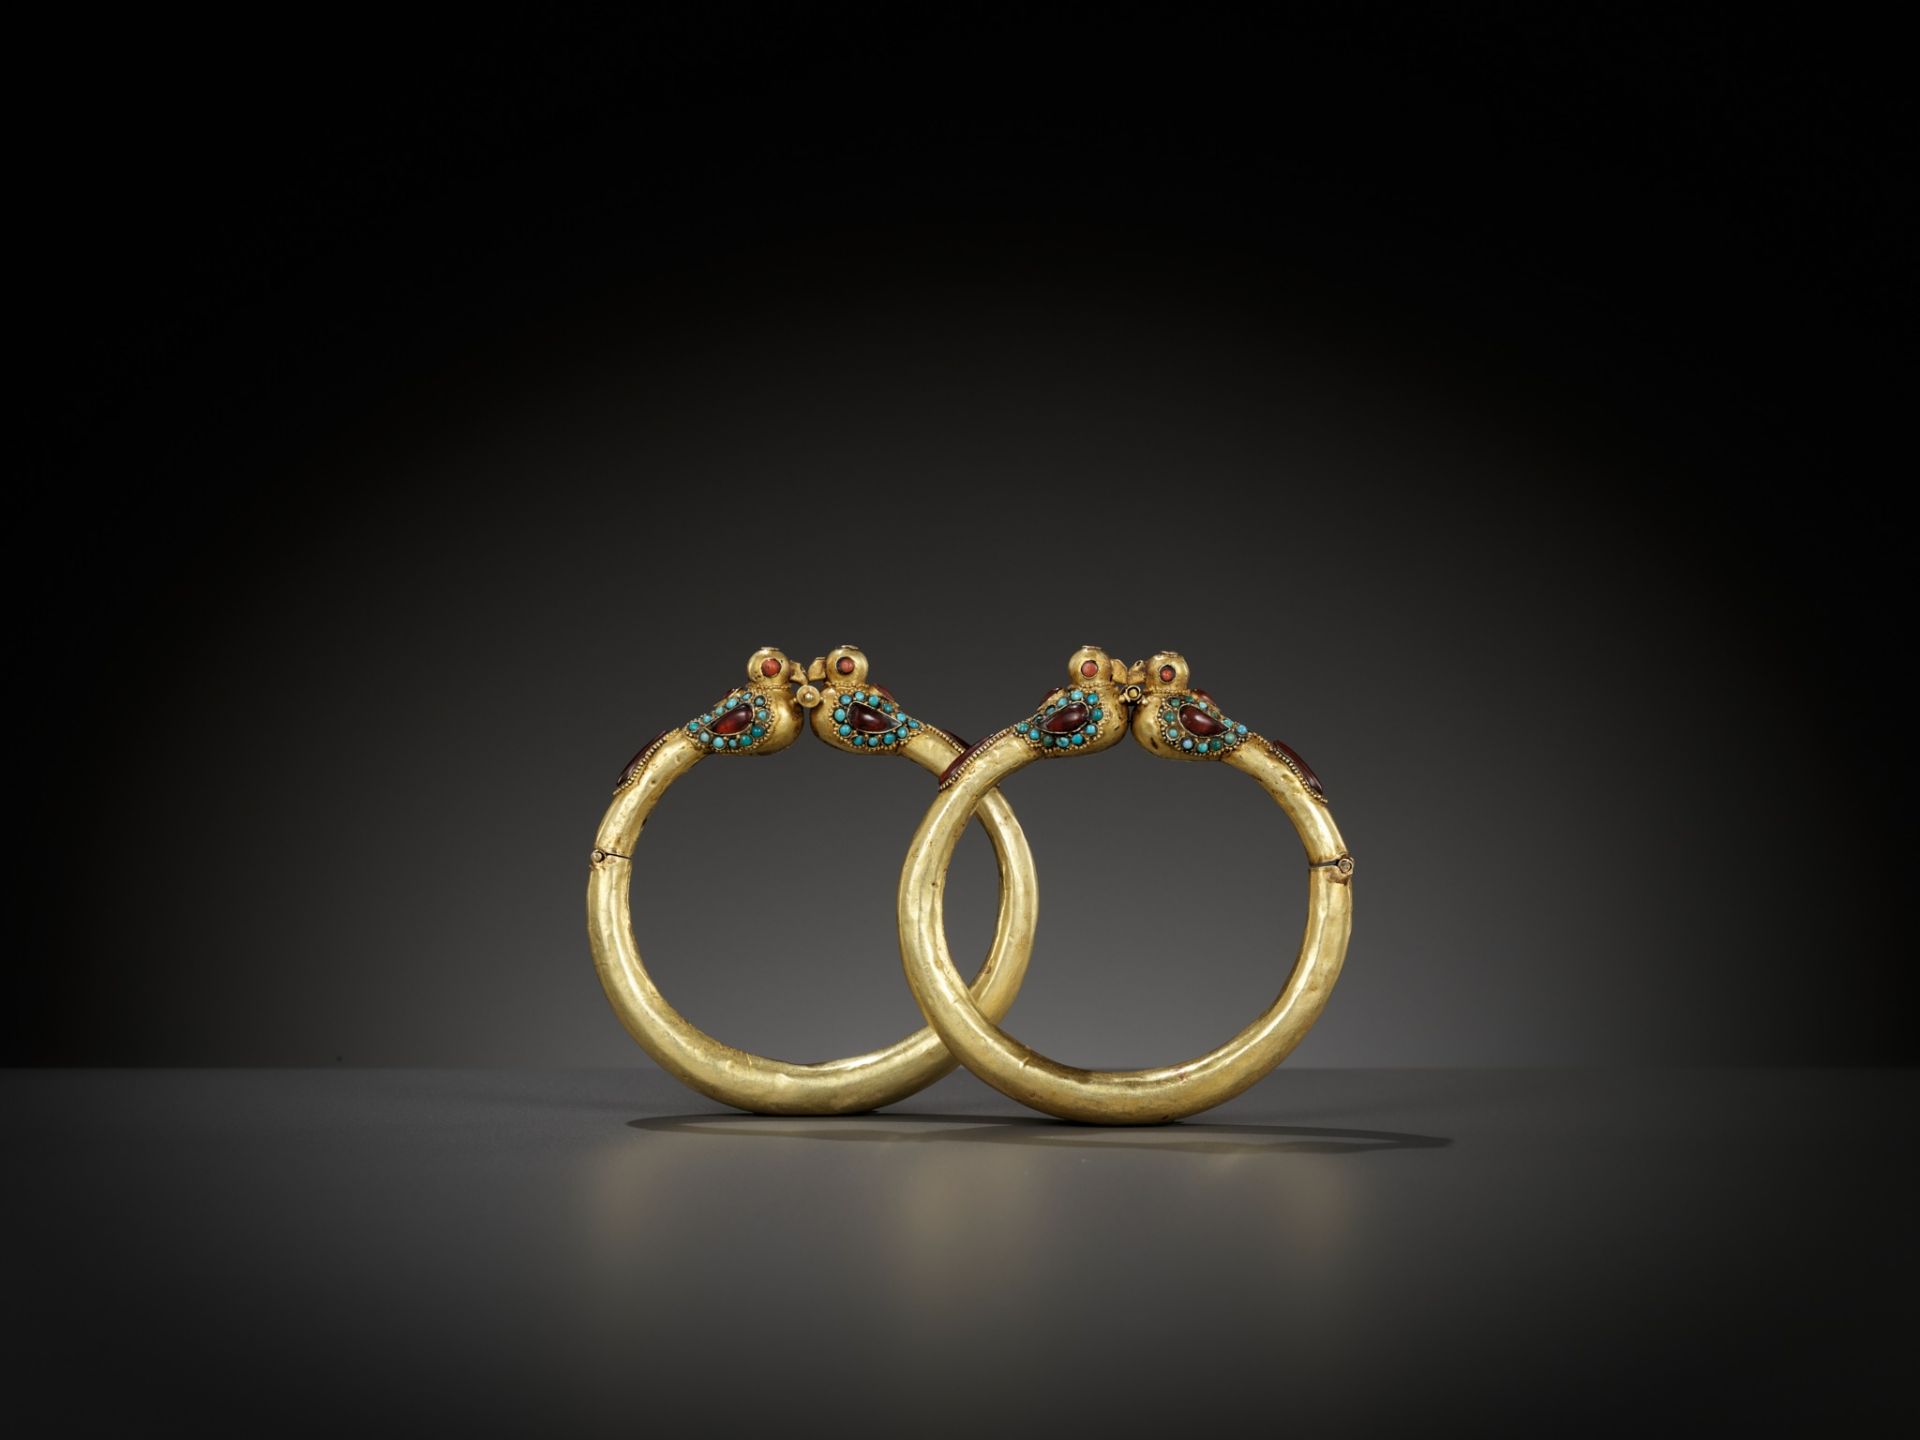 A PAIR OF GOLD 'BIRD' BANGLES, PERSIA, 11TH TO 12TH CENTURY - Image 8 of 9